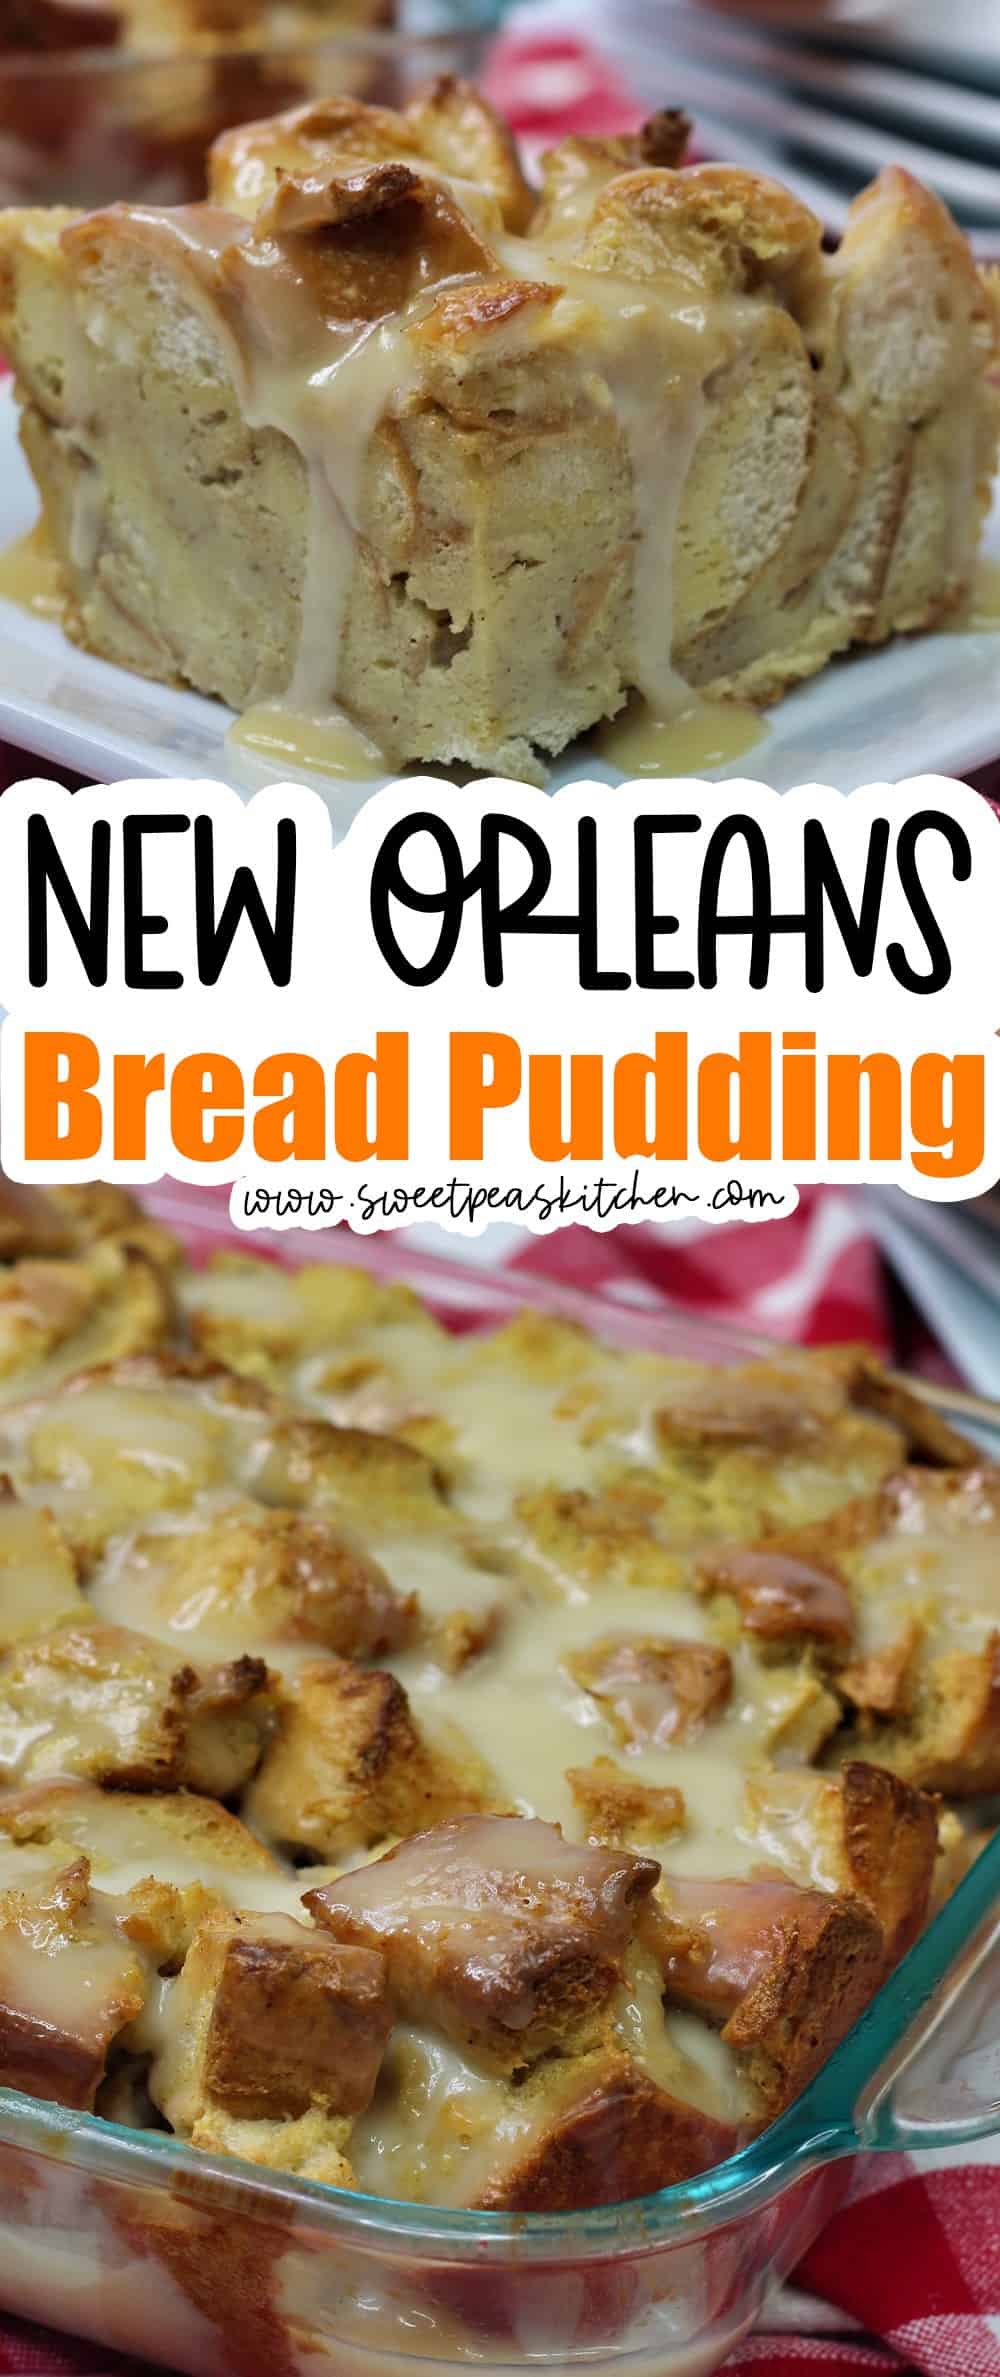 New Orleans Bread Pudding